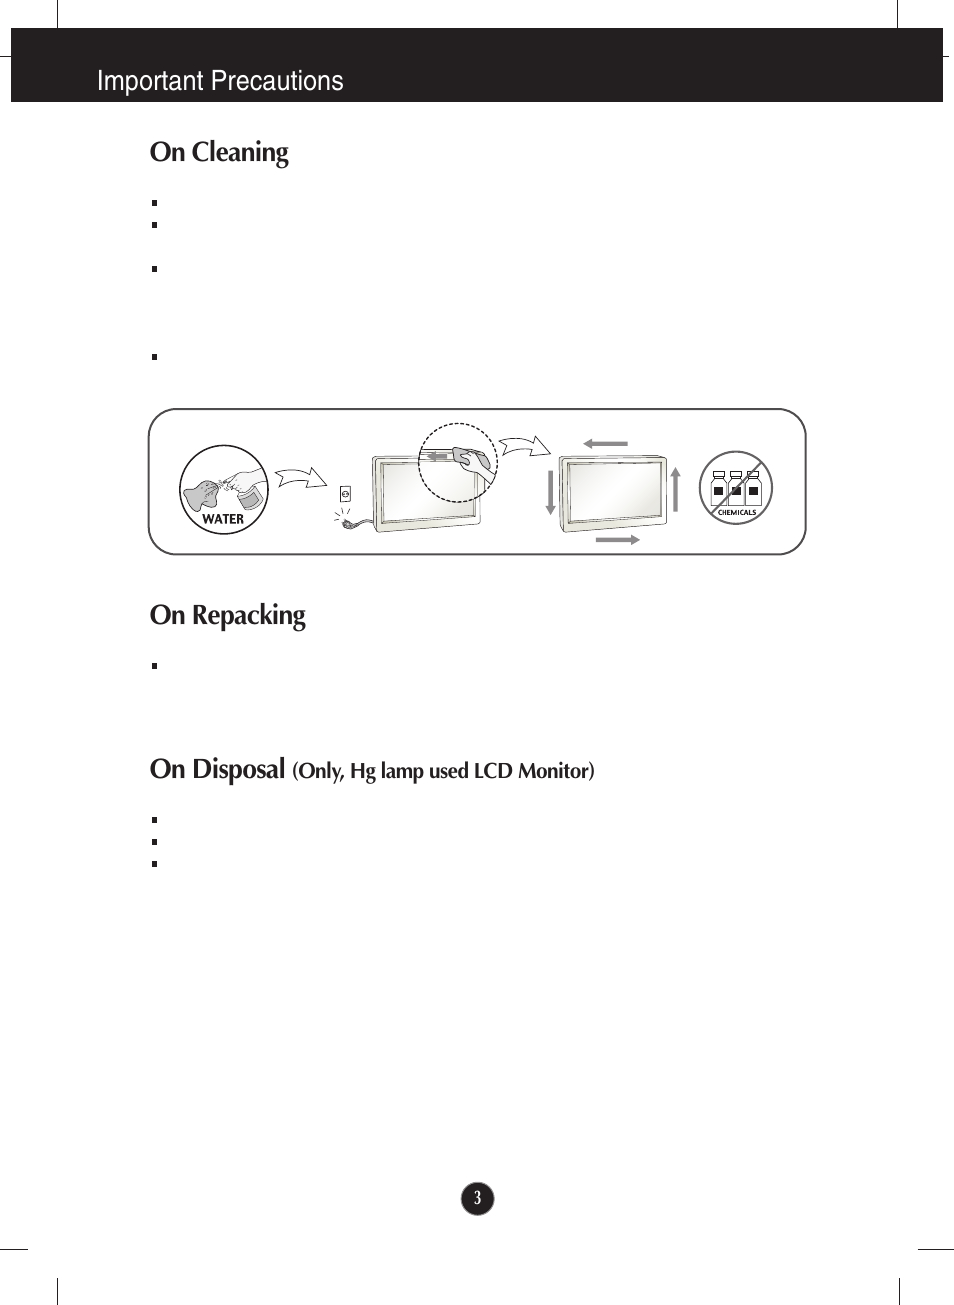 On cleaning, On repacking, On disposal (only, hg lamp used lcd monitor) | Important precautions, On disposal | LG W1943TB-PF User Manual | Page 4 / 34